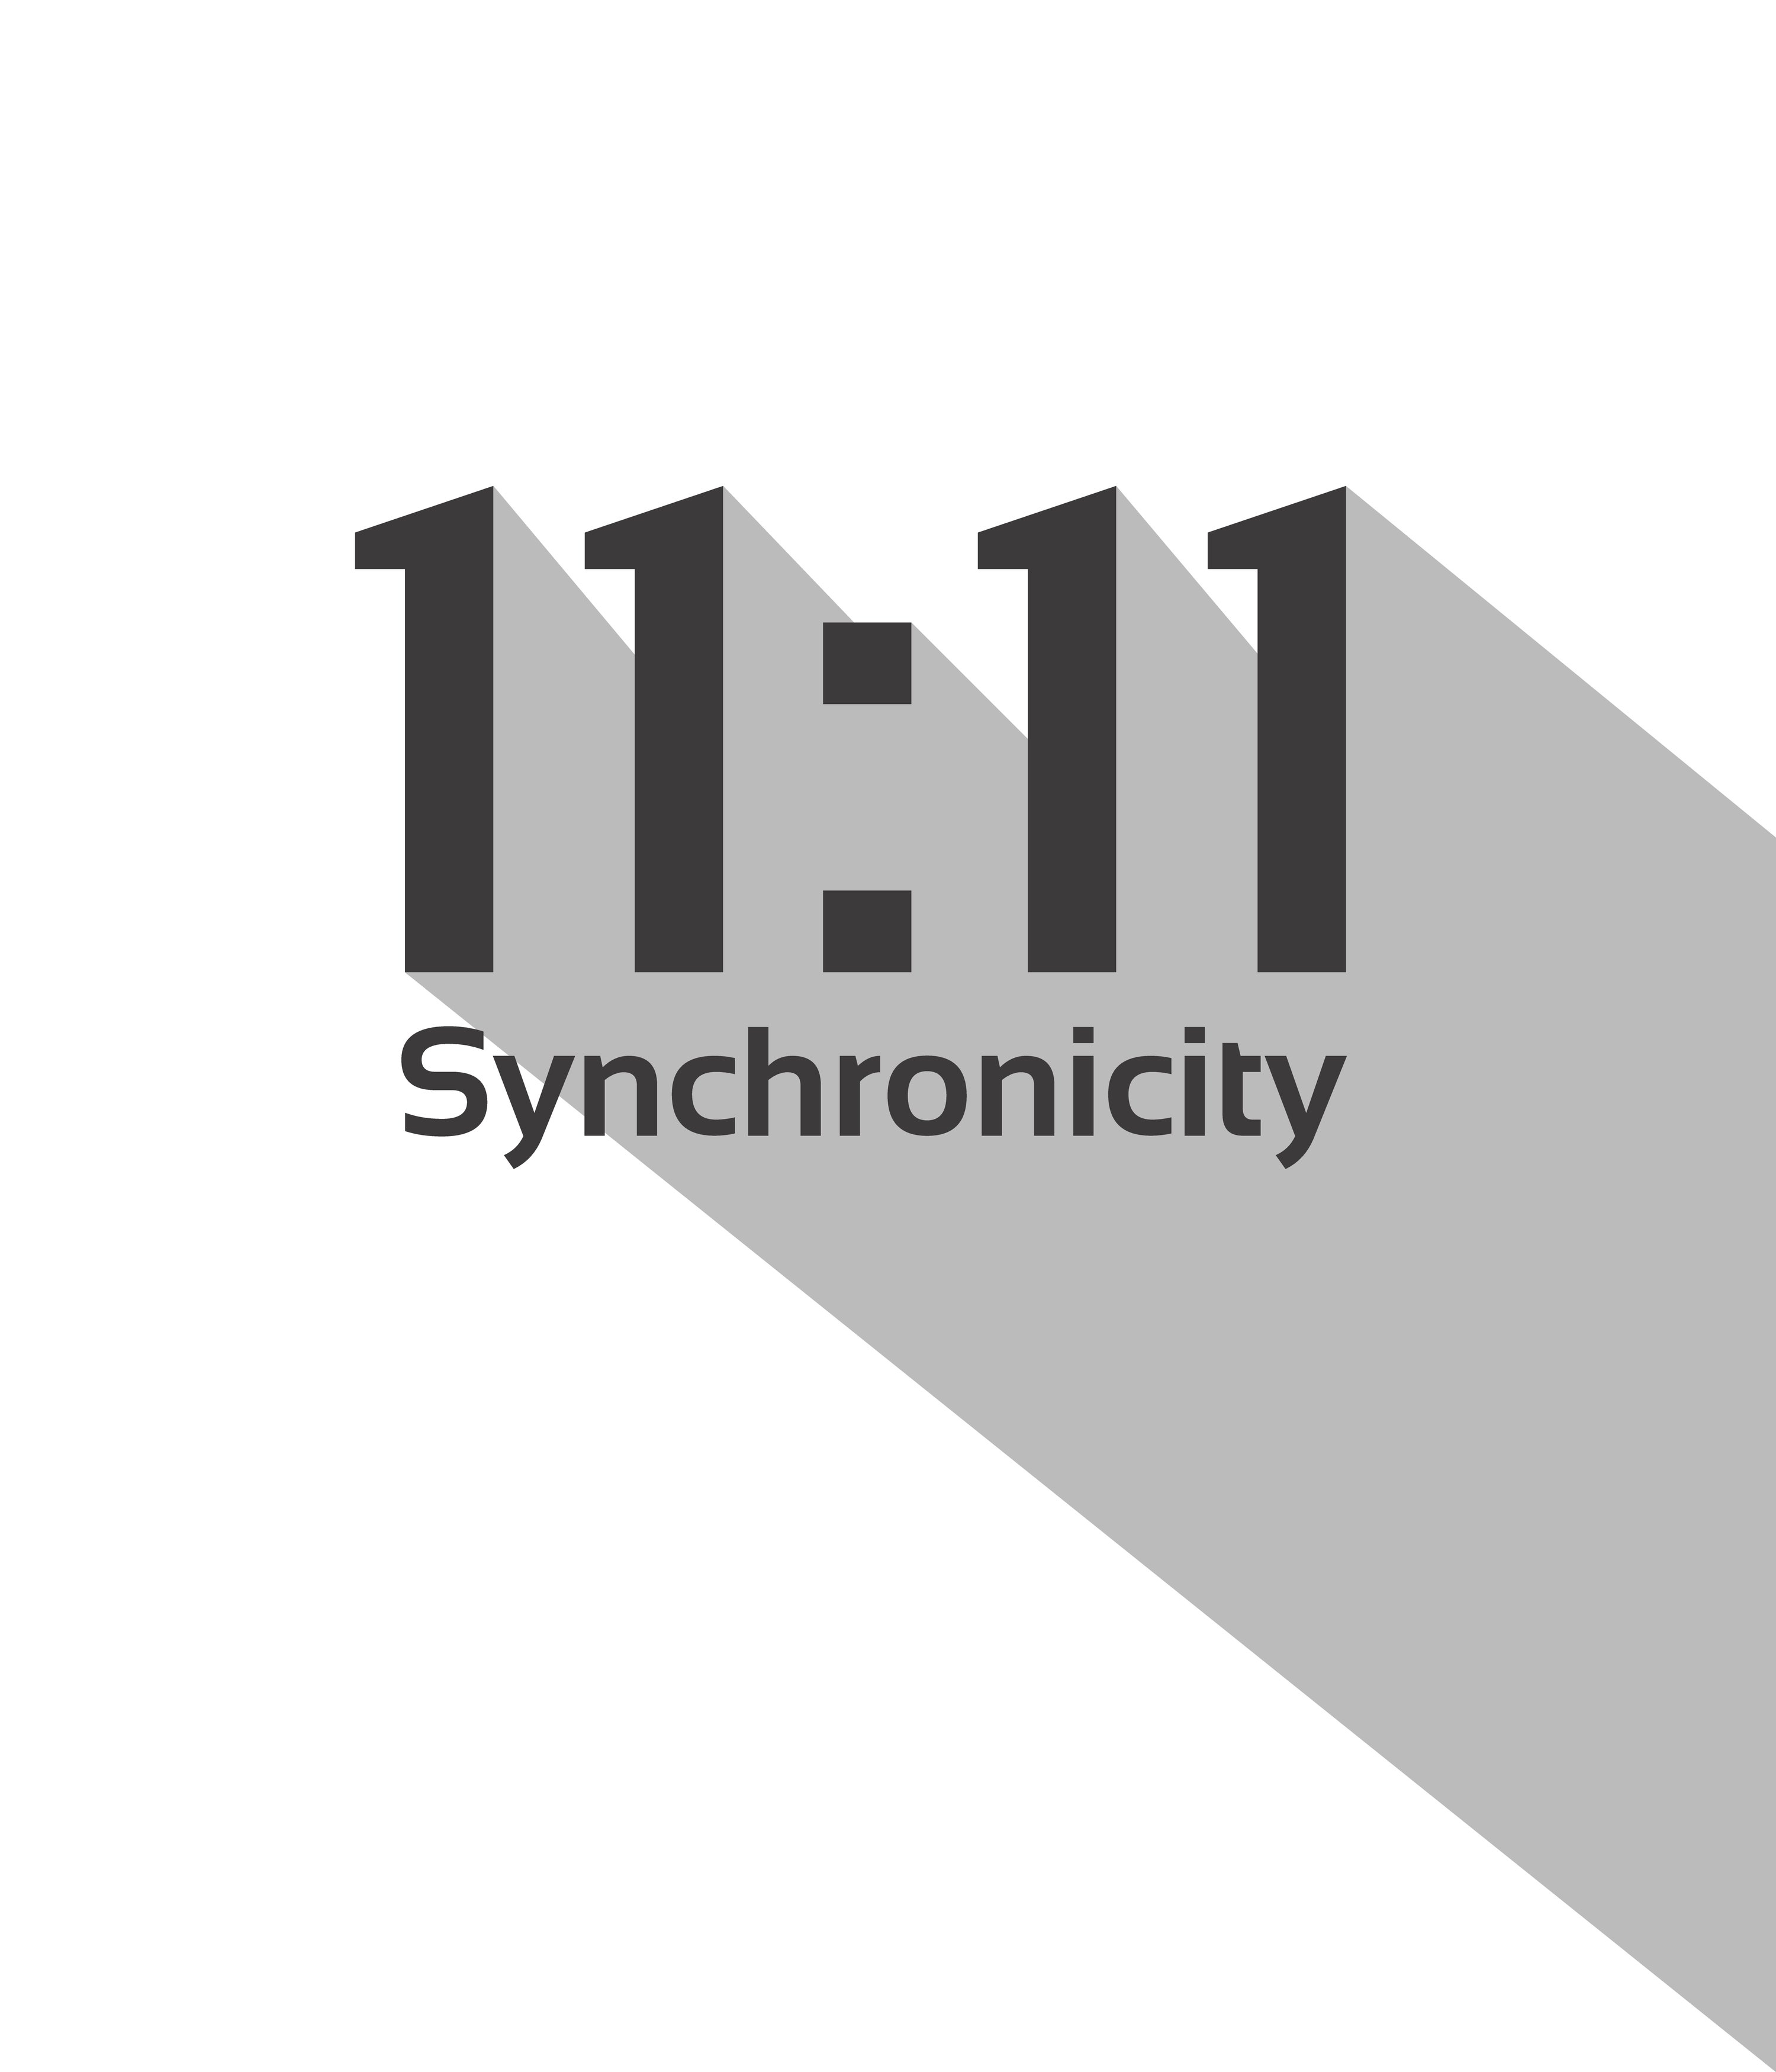 An image depicting the angel number 11:11, with the text "Syncronicity" underneath | Source: Shutterstock